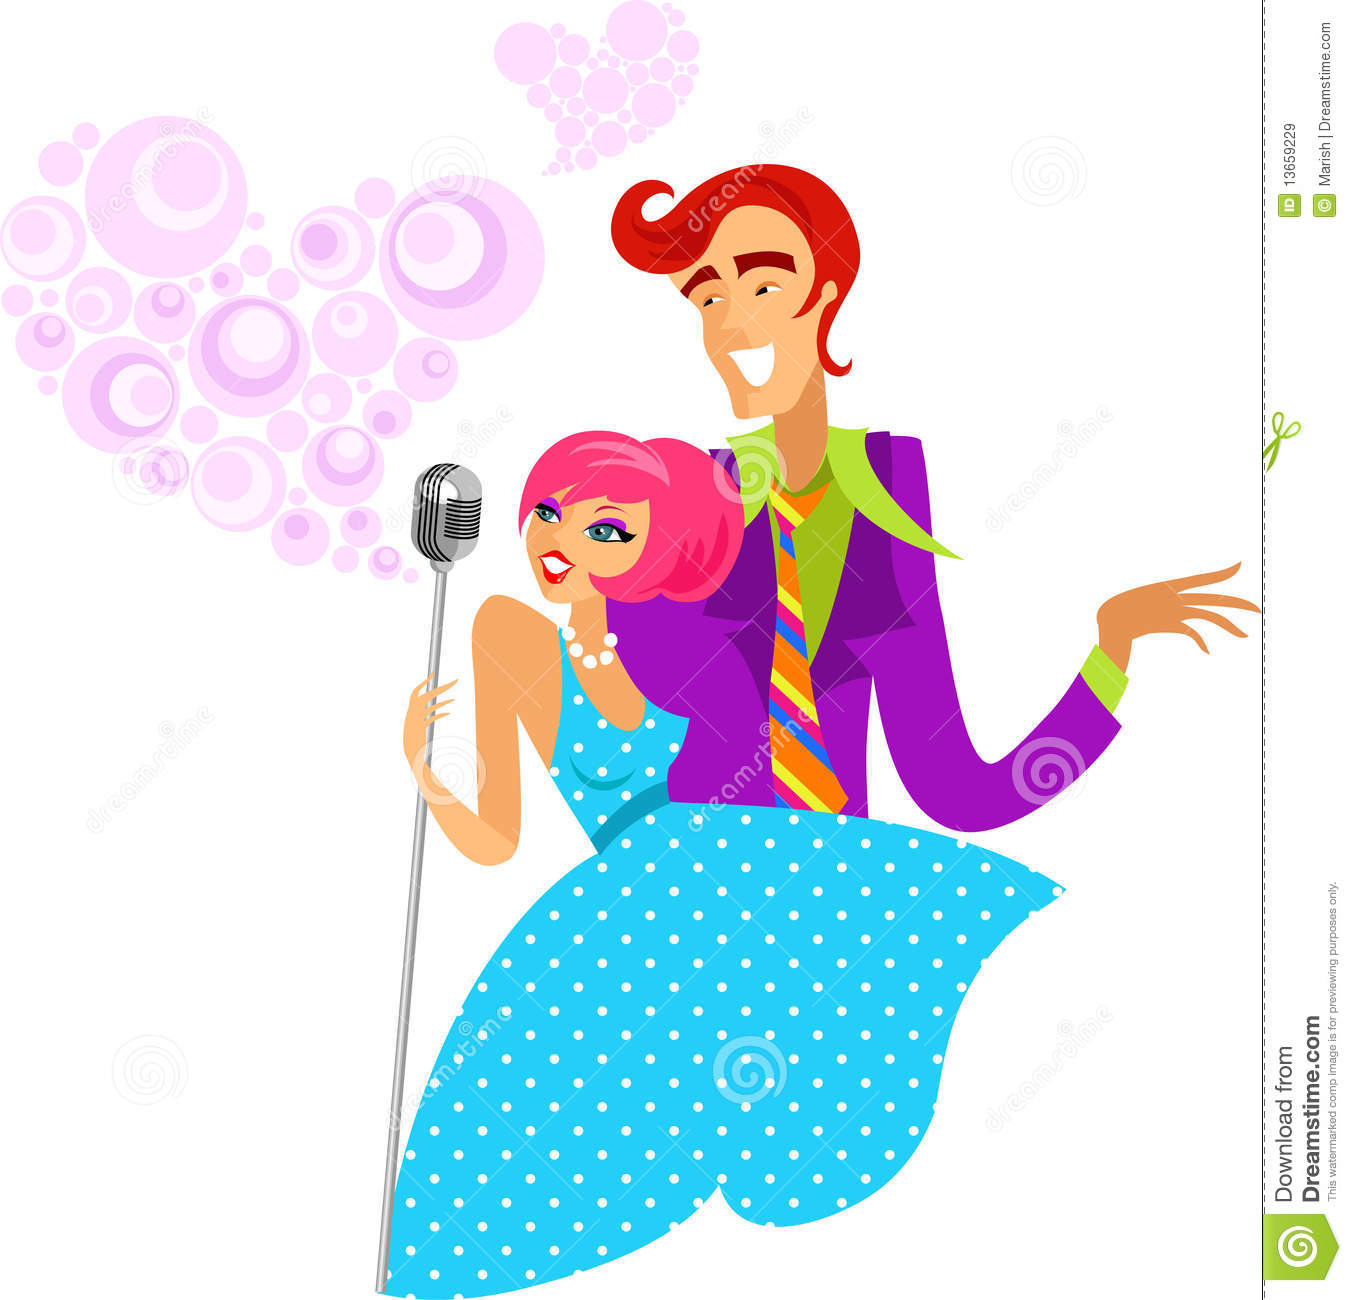 Boy And Girl Singing In Retro Mic Brightly Colored Illustration In